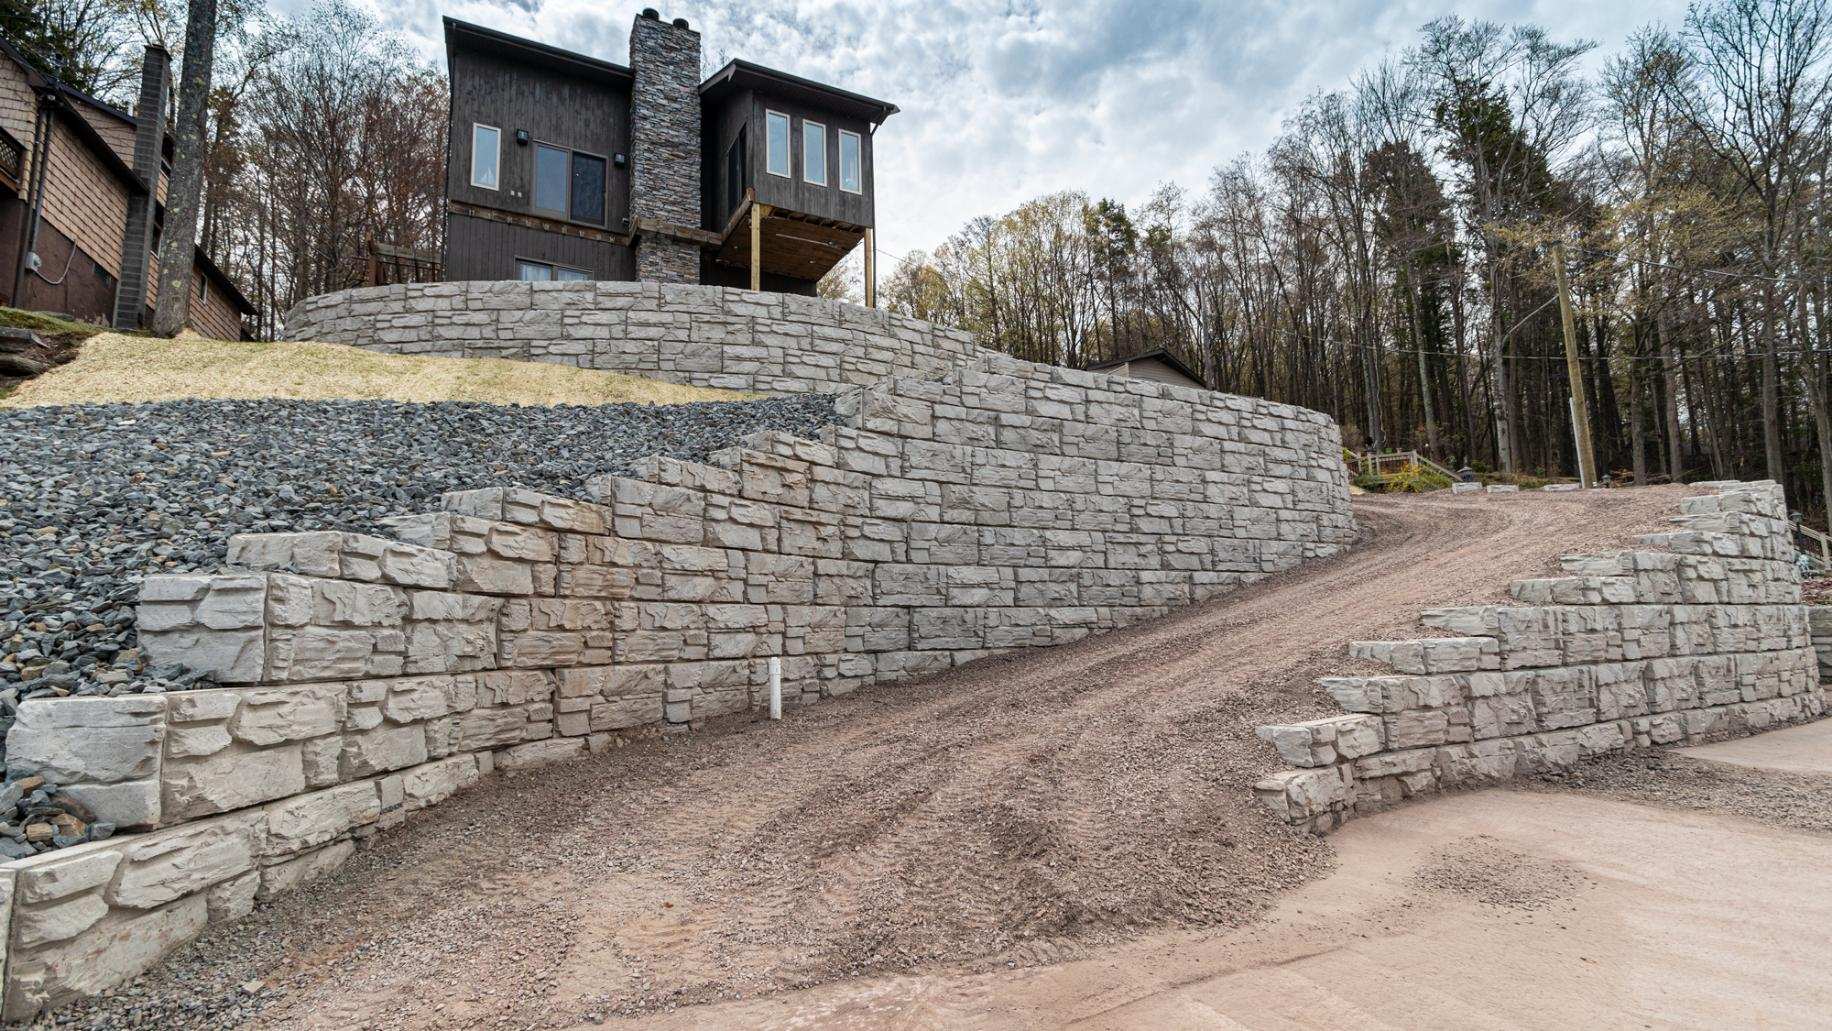 MagnumStone top of wall step-down details of retaining wall.